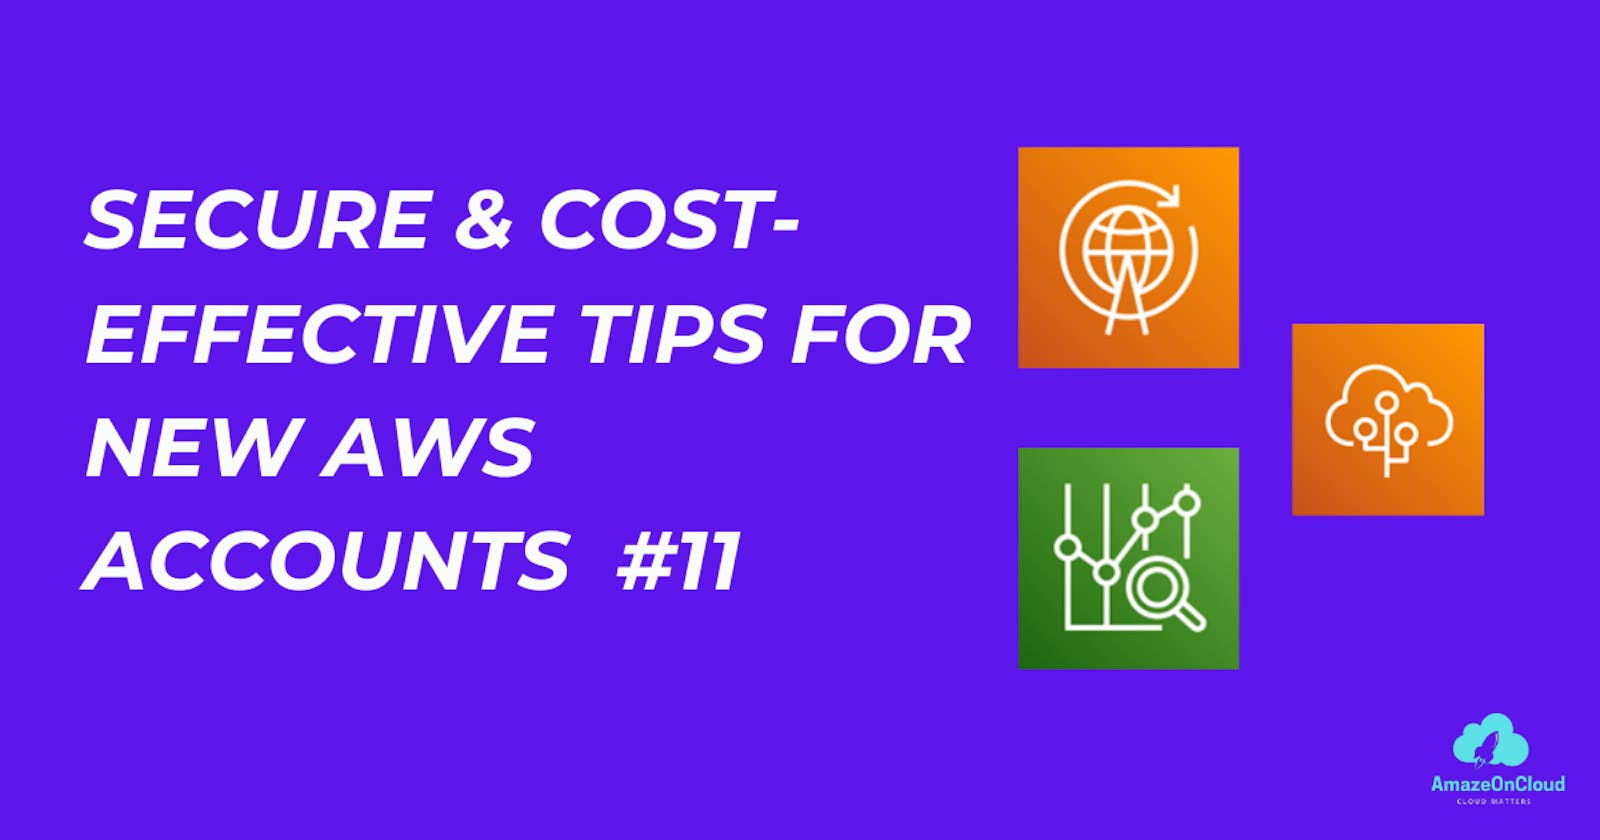 Secure & Cost-Effective Tips for New AWS Accounts #11